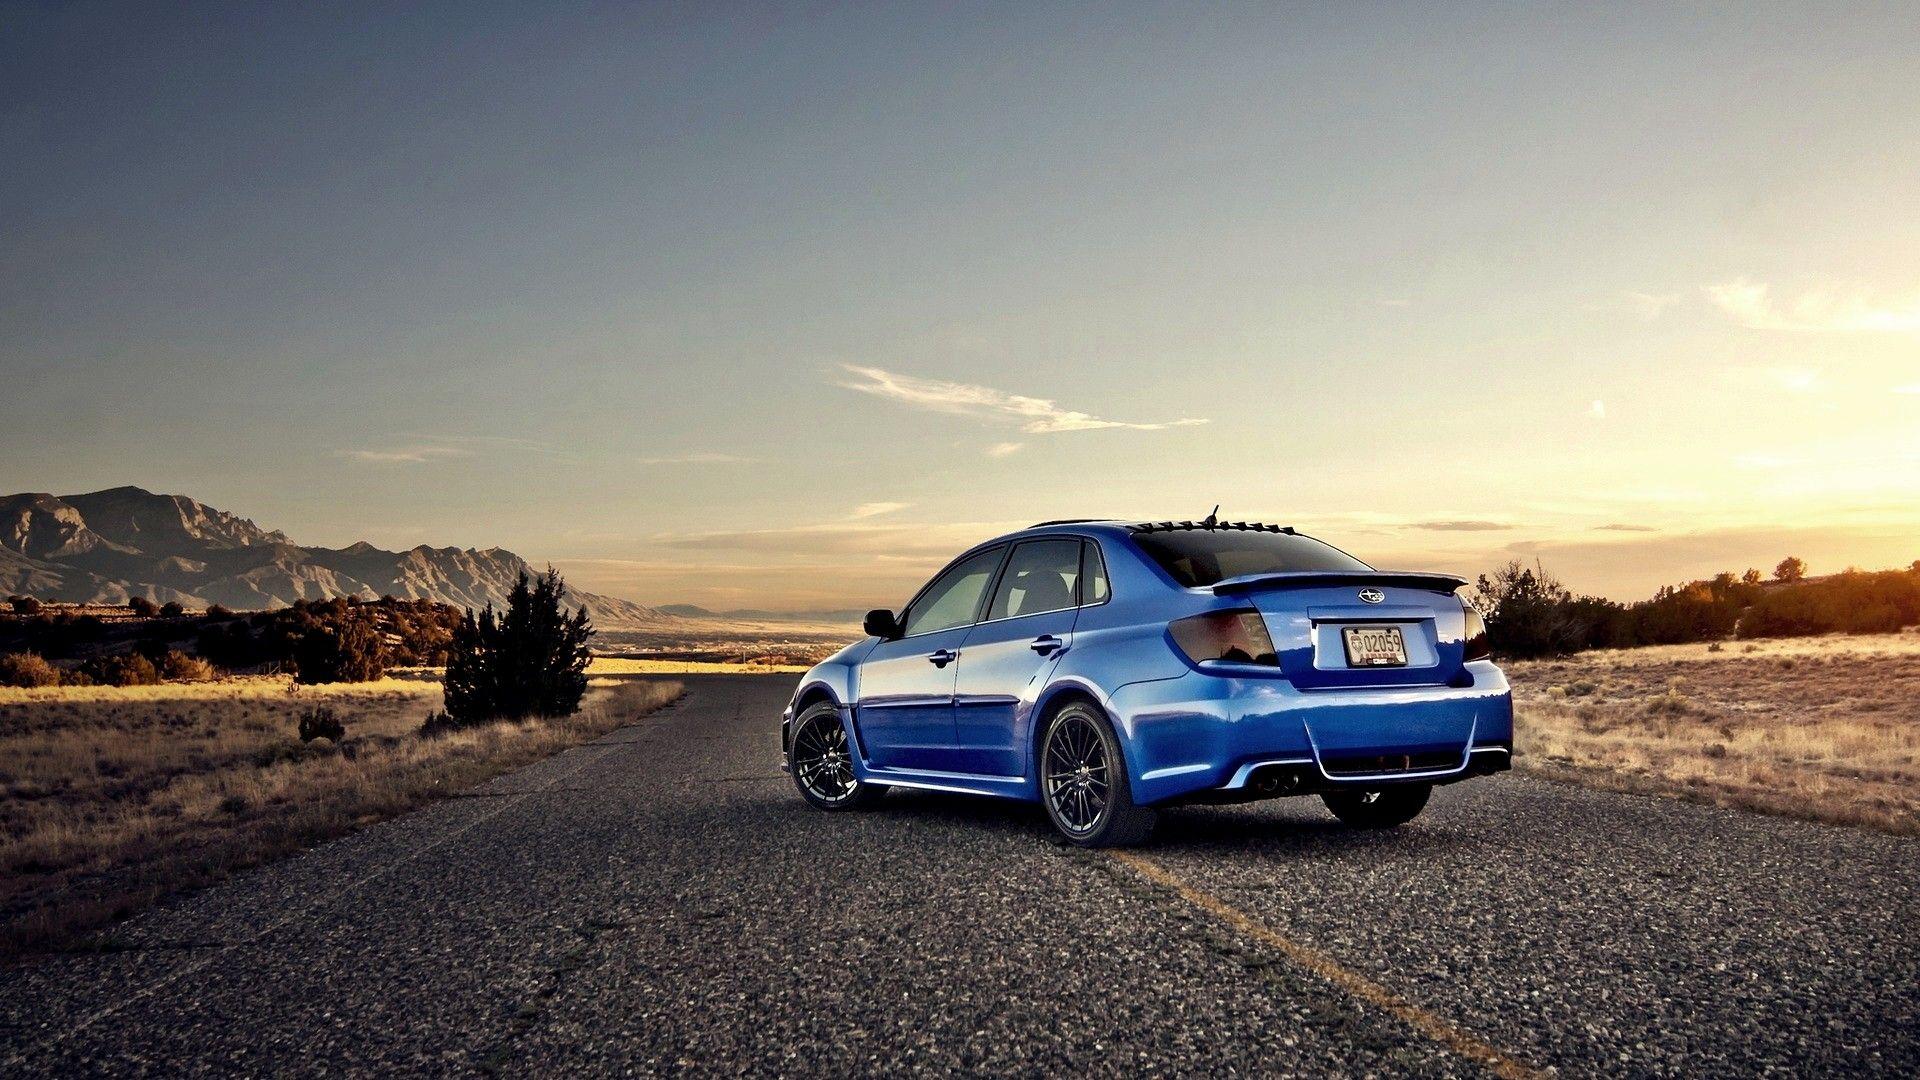 WRX Wallpapers - Top Free WRX